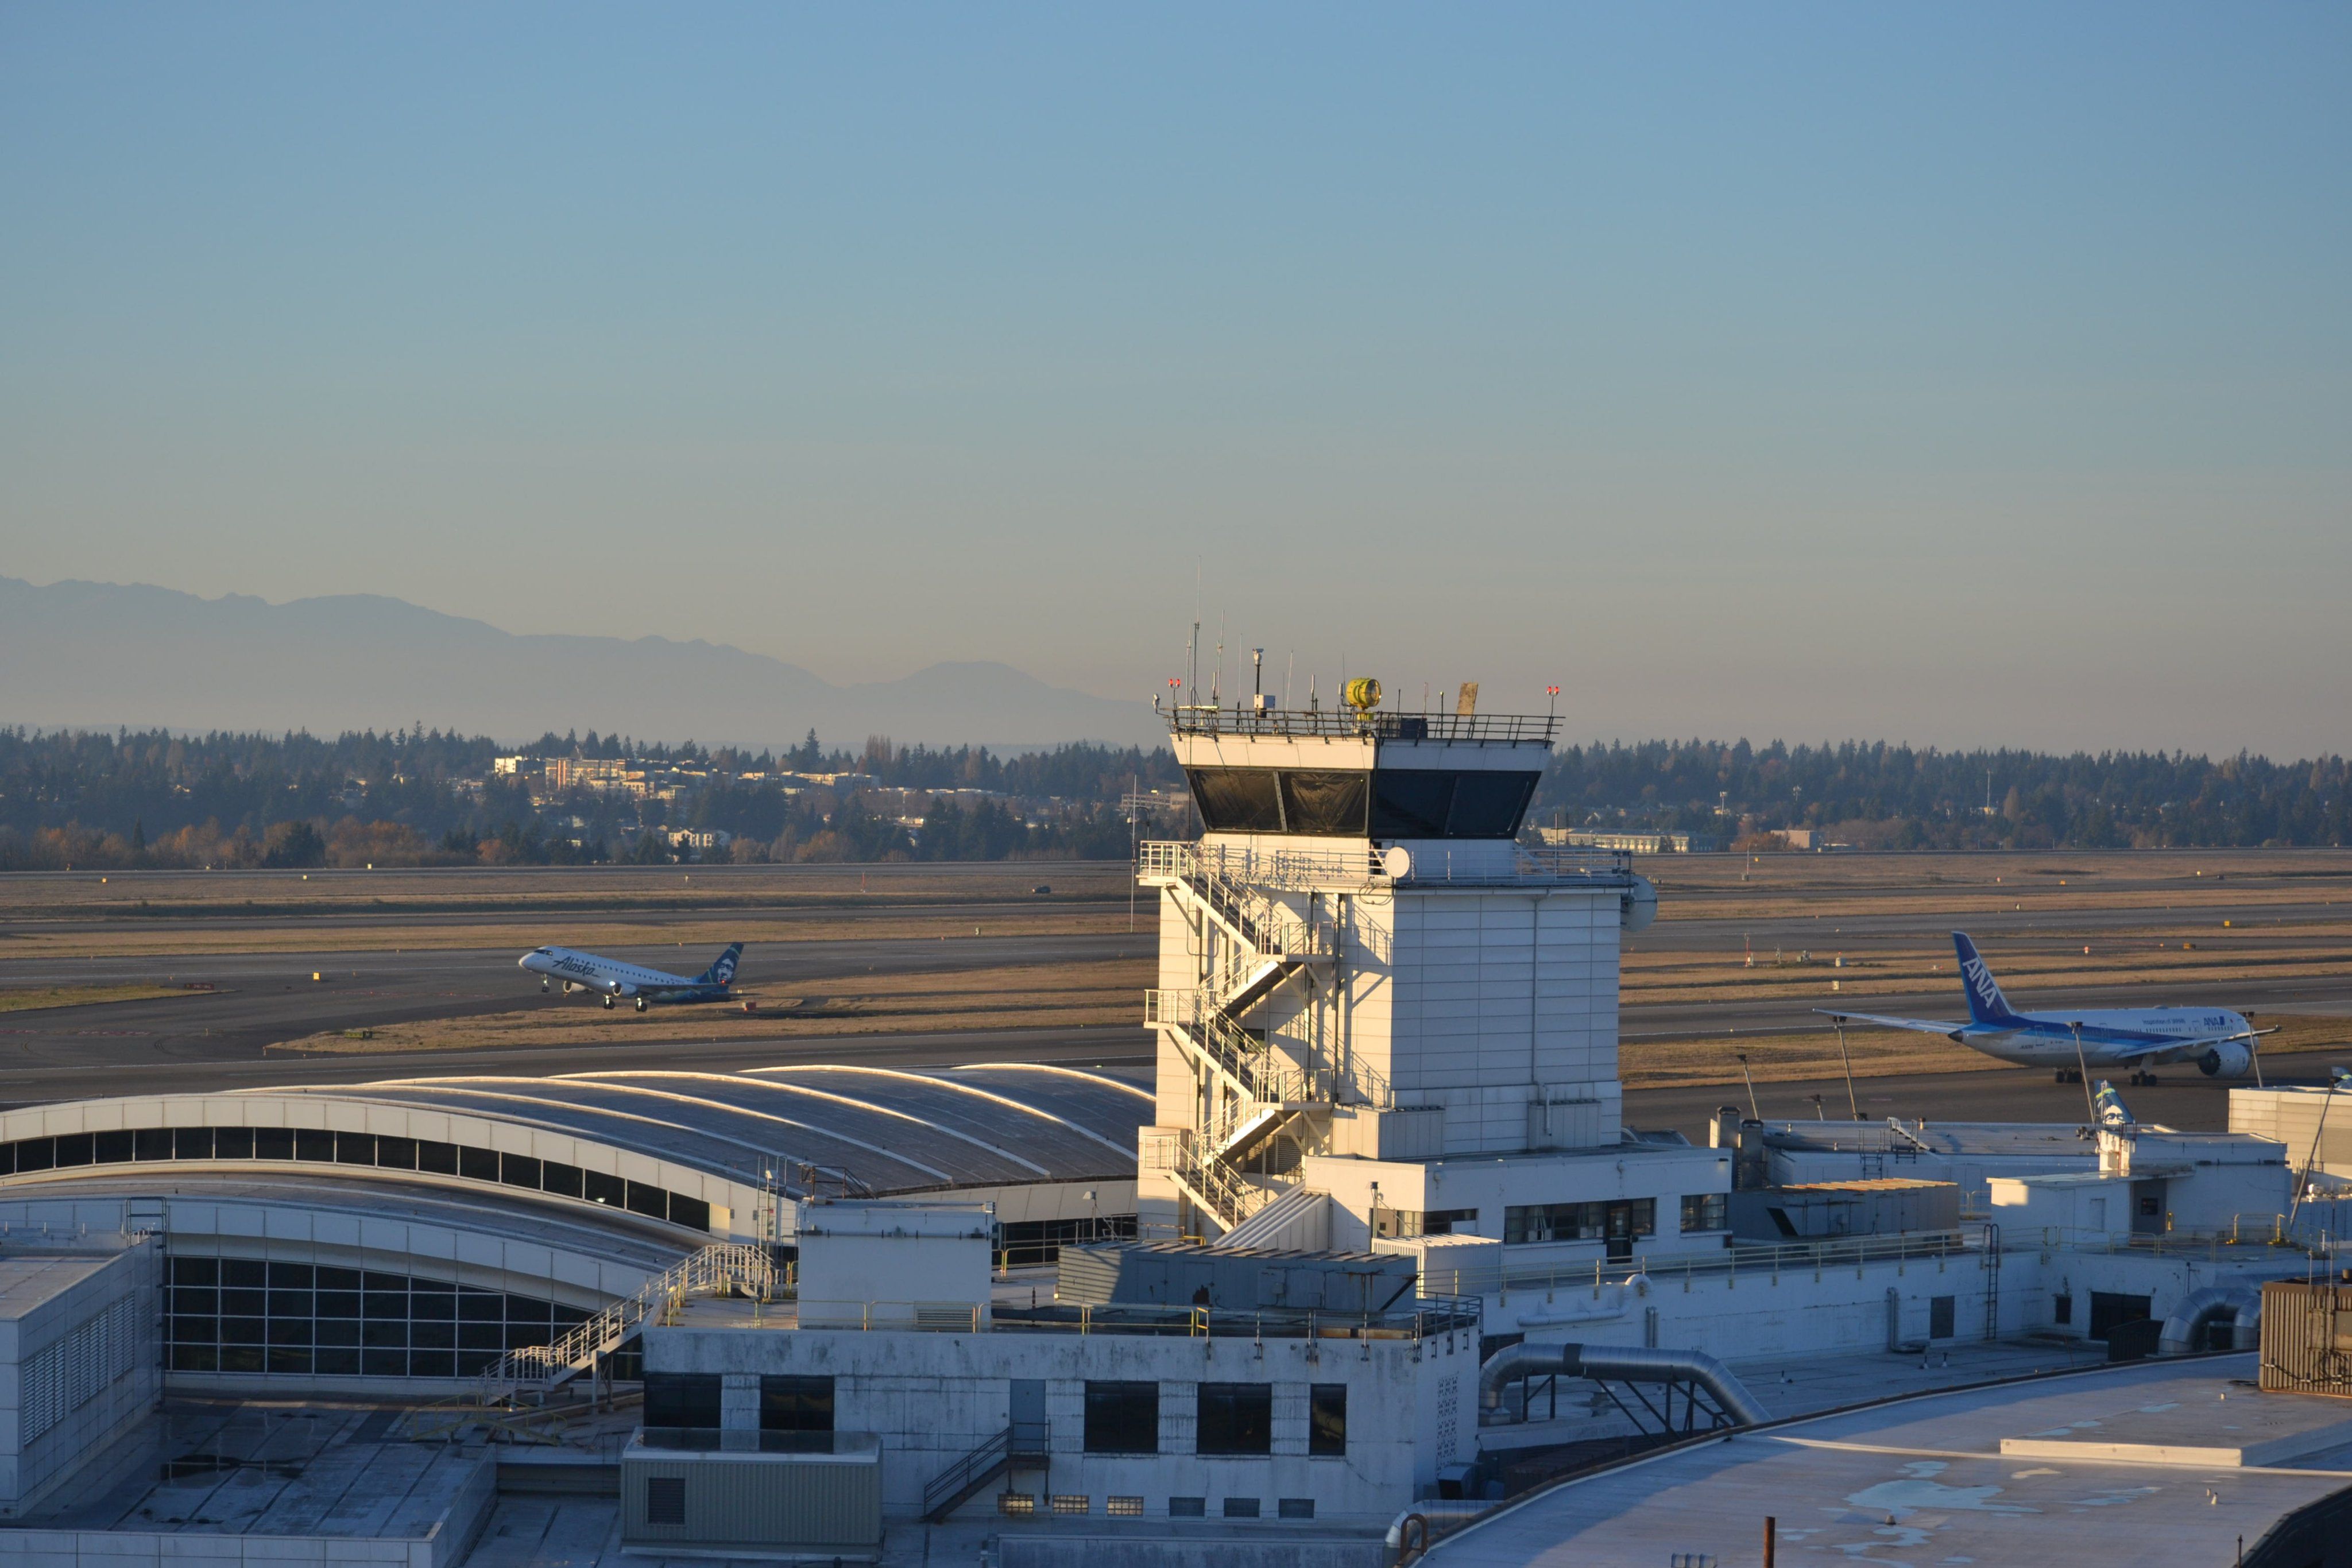 Airplanes at Seattle-Tacoma International Airport.